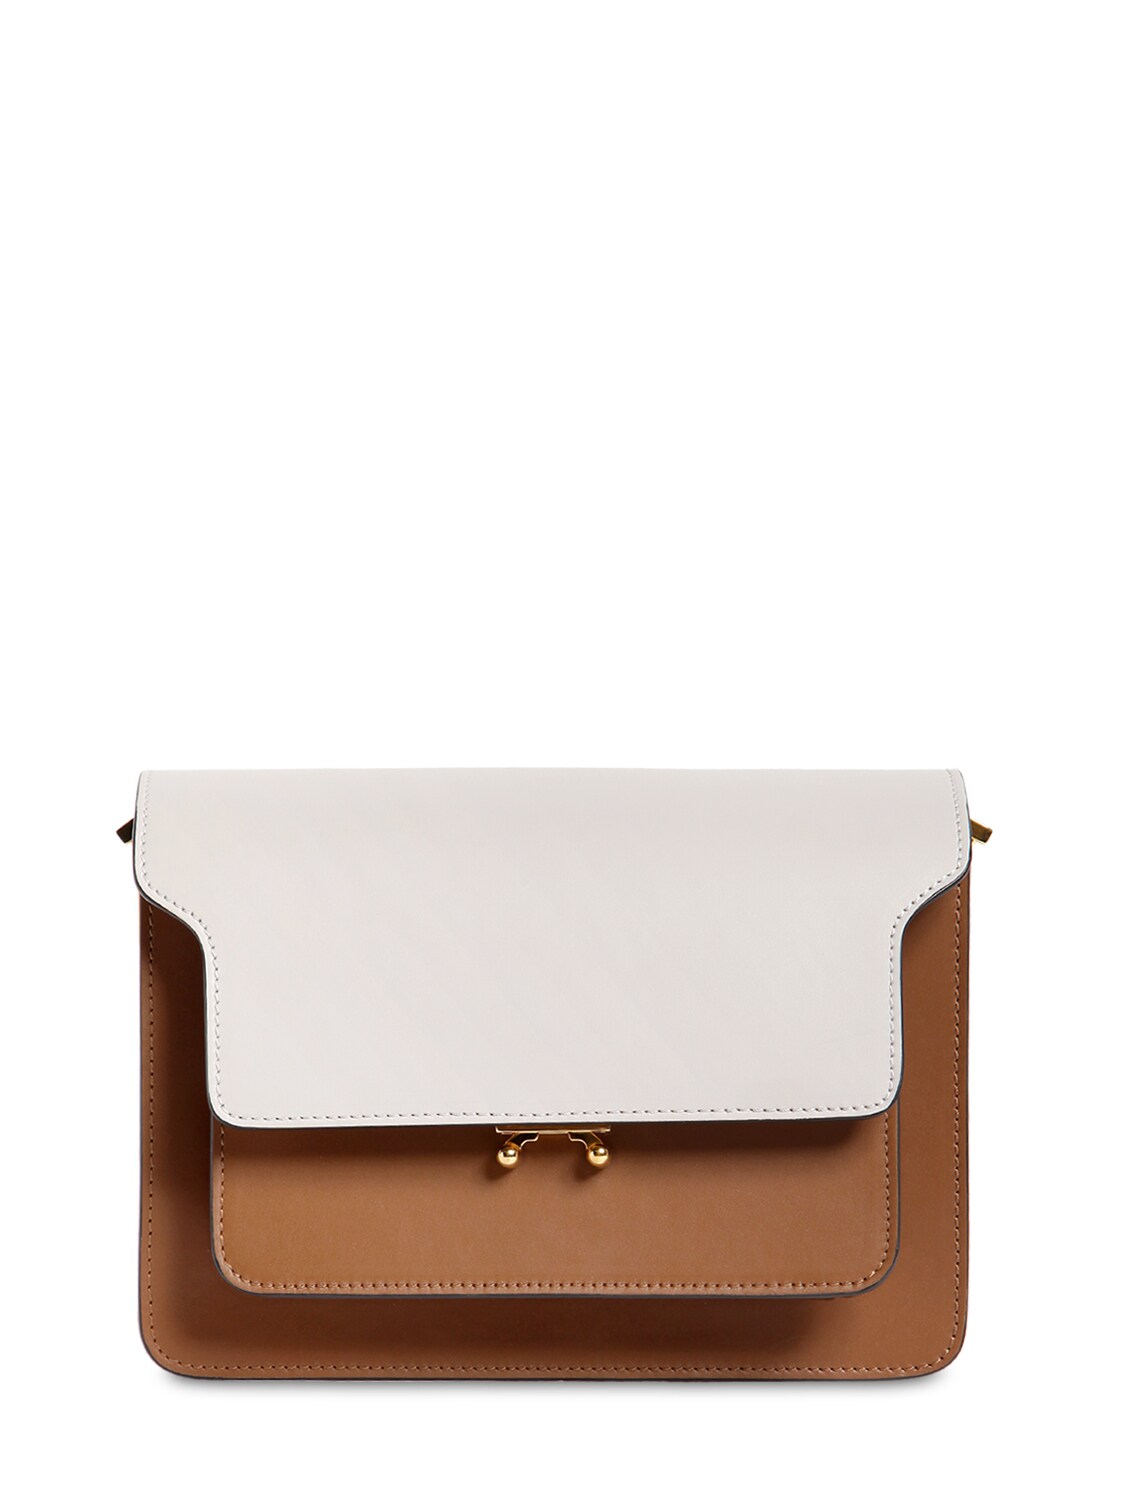 Marni Medium Trunk Tricolor Leather Bag In White,brown